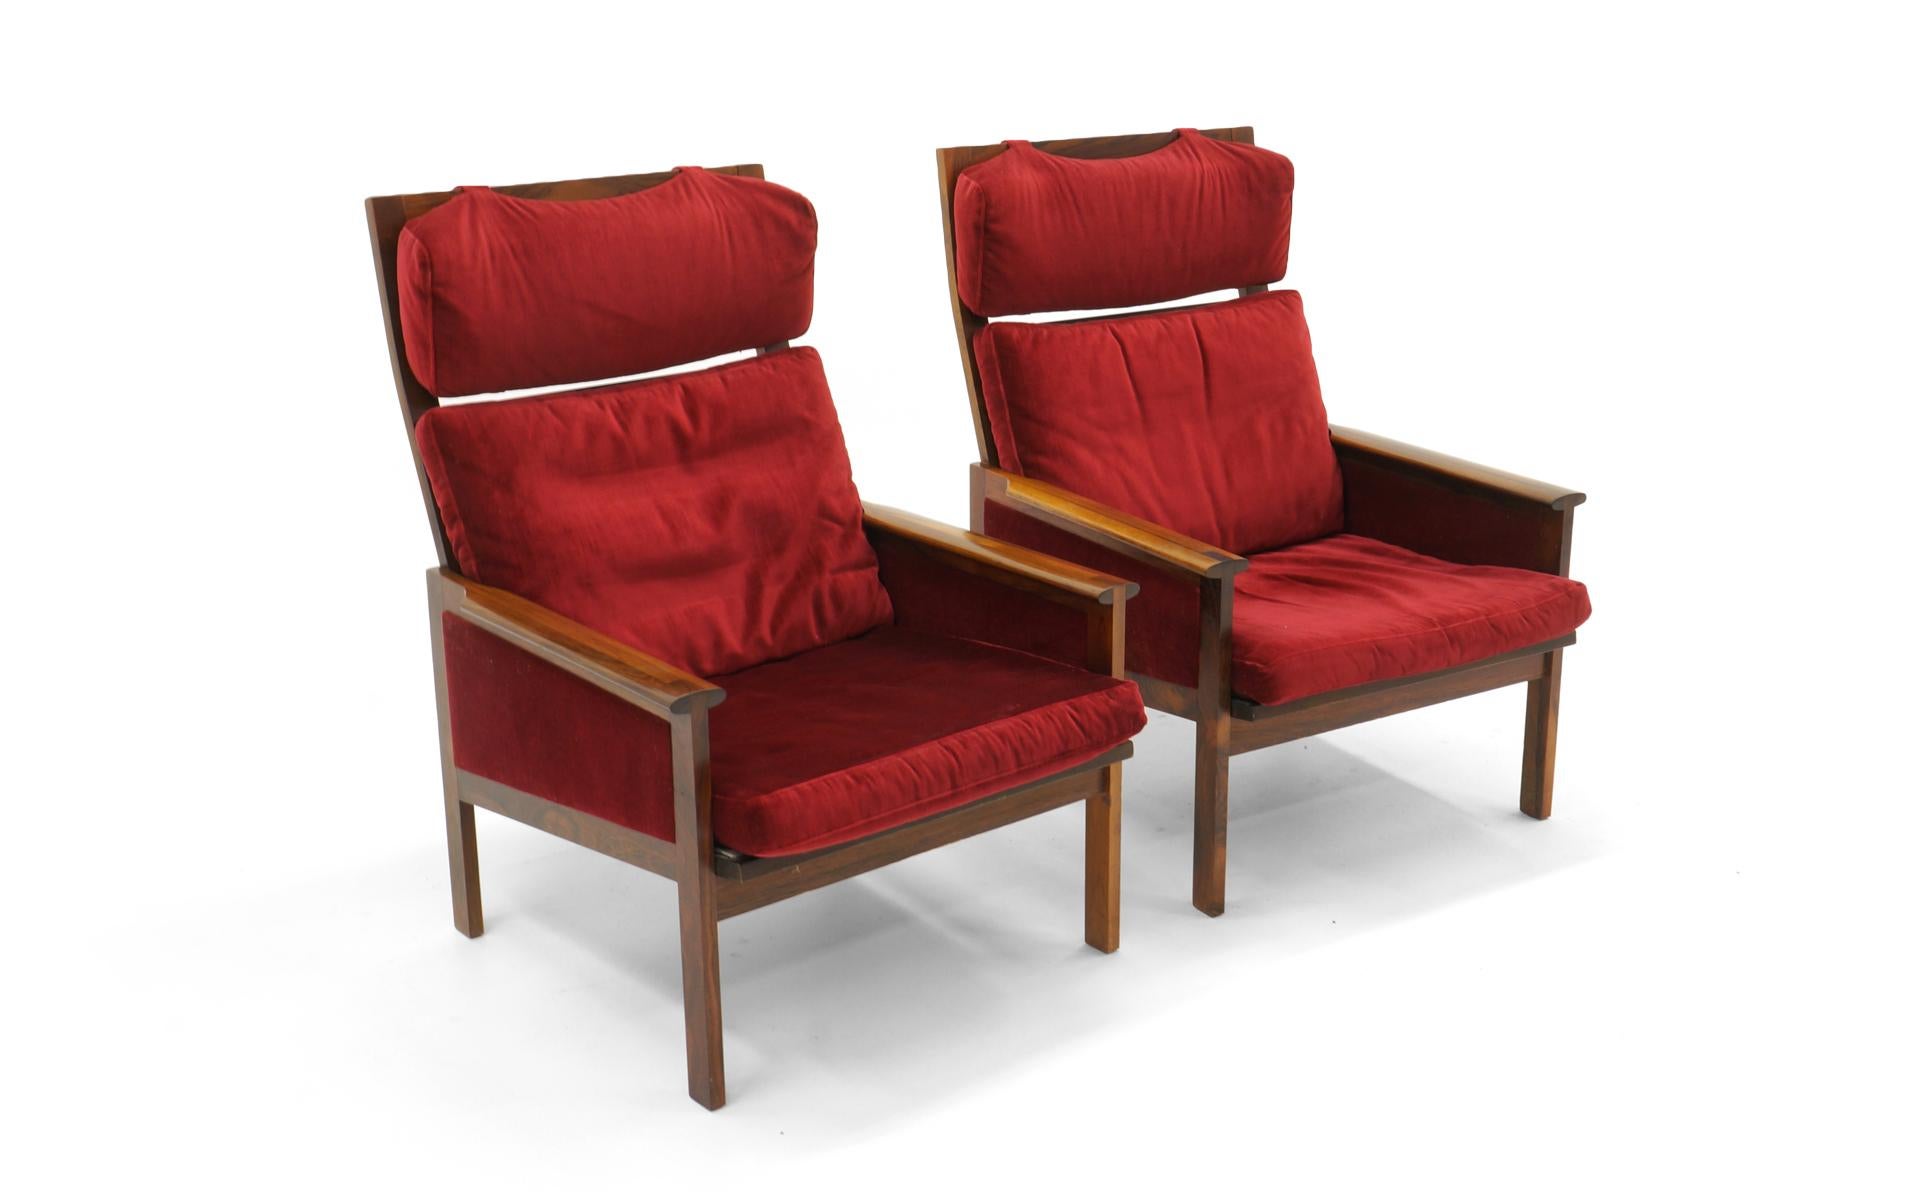 Pair of Danish modern high-back rosewood lounge chairs by Illum Wikkelso for Niels Eilersen A/S, 1960s. Eilersen label, Danish control sticker.